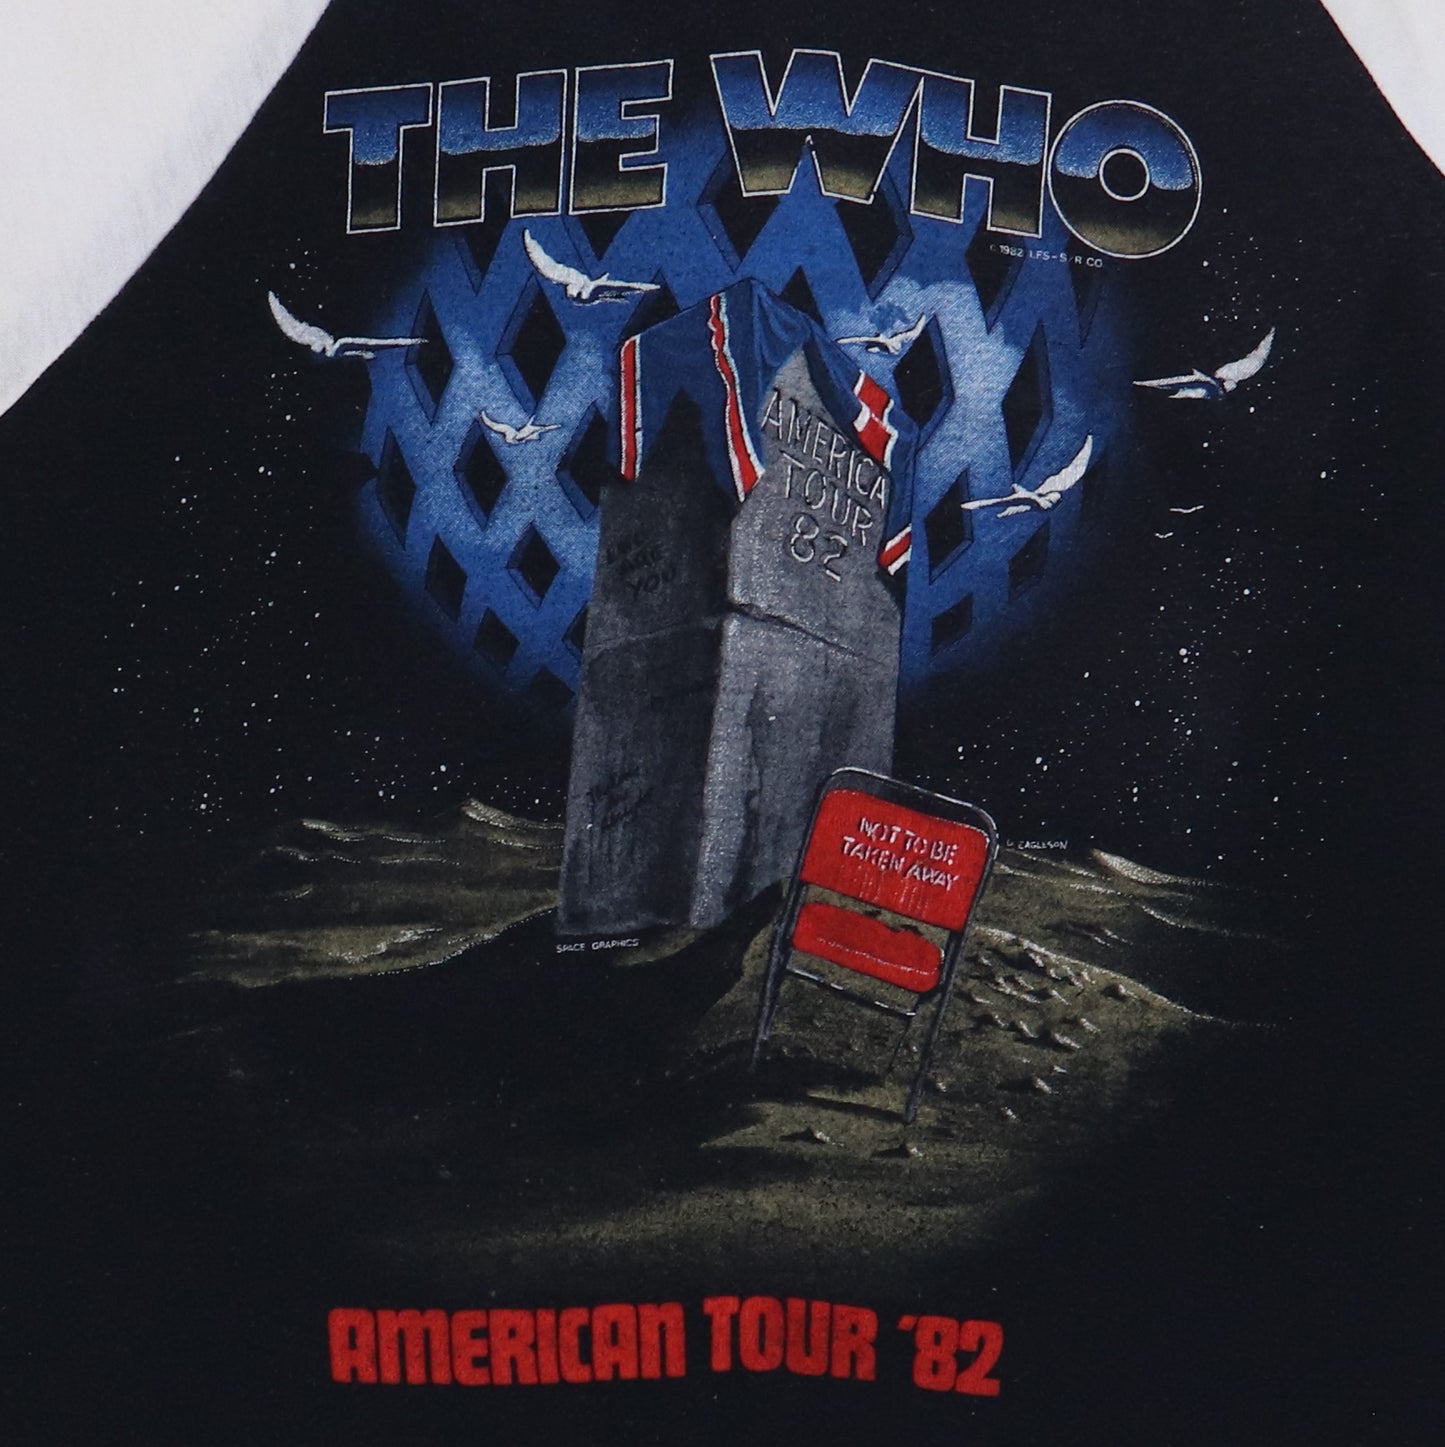 1982 The Who North American Tour Jersey Shirt